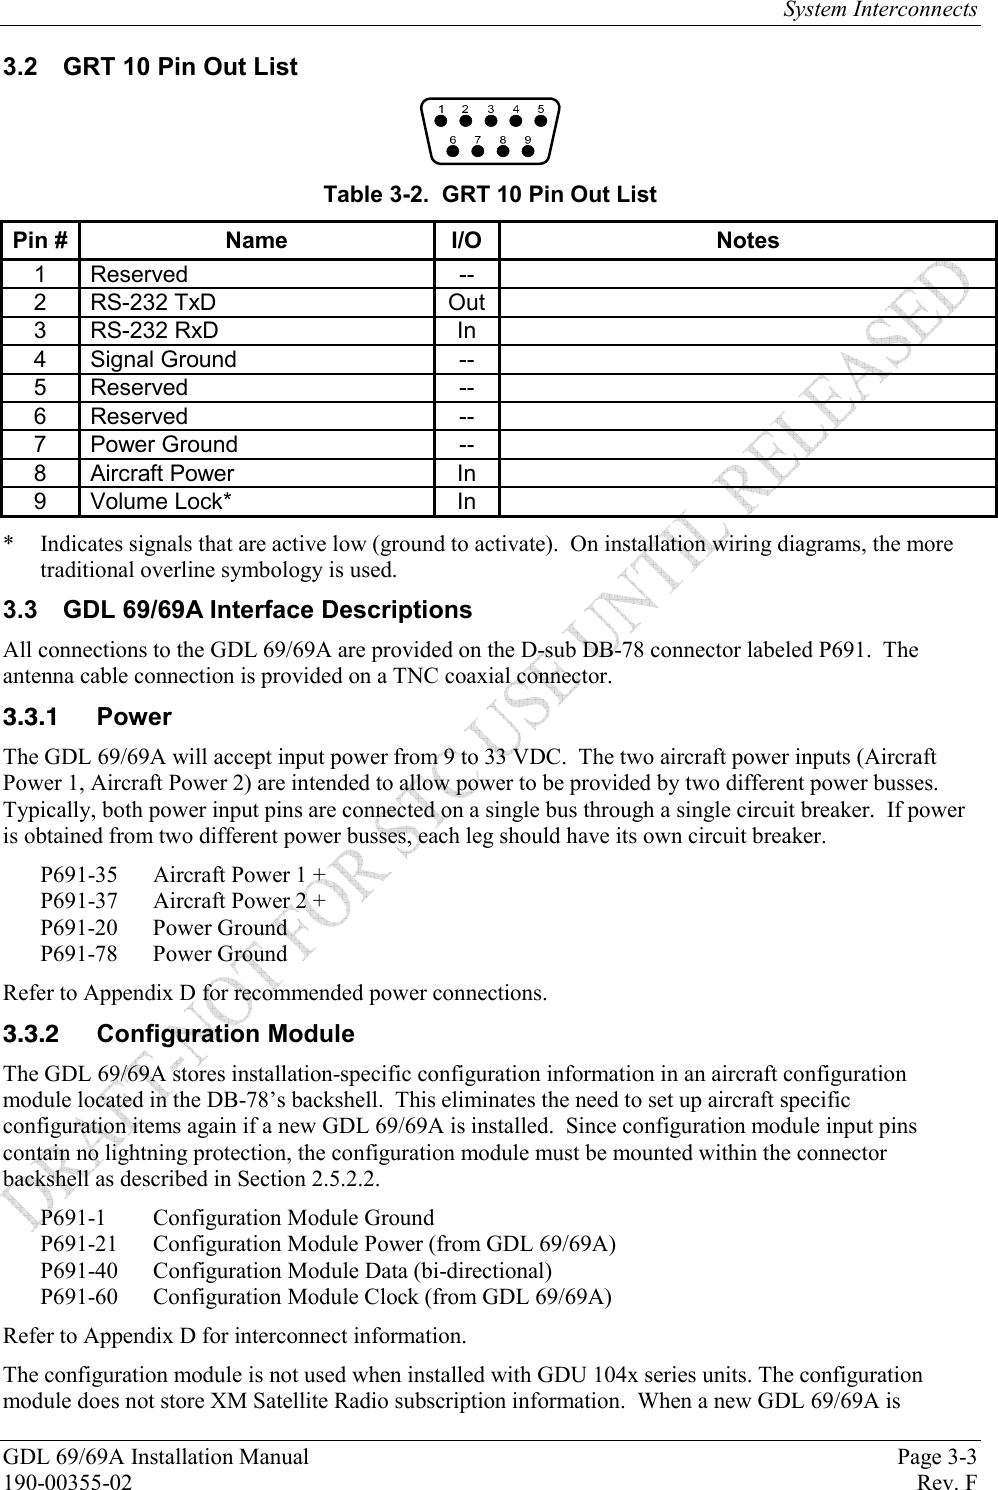 System Interconnects GDL 69/69A Installation Manual  Page 3-3 190-00355-02   Rev. F 3.2  GRT 10 Pin Out List  Table 3-2.  GRT 10 Pin Out List Pin #  Name  I/O  Notes 1 Reserved  --  2 RS-232 TxD  Out  3 RS-232 RxD  In  4 Signal Ground  --  5 Reserved  --  6 Reserved  --  7 Power Ground  --  8 Aircraft Power  In  9 Volume Lock*  In  *  Indicates signals that are active low (ground to activate).  On installation wiring diagrams, the more traditional overline symbology is used. 3.3  GDL 69/69A Interface Descriptions All connections to the GDL 69/69A are provided on the D-sub DB-78 connector labeled P691.  The antenna cable connection is provided on a TNC coaxial connector.  Power The GDL 69/69A will accept input power from 9 to 33 VDC.  The two aircraft power inputs (Aircraft Power 1, Aircraft Power 2) are intended to allow power to be provided by two different power busses.  Typically, both power input pins are connected on a single bus through a single circuit breaker.  If power is obtained from two different power busses, each leg should have its own circuit breaker. P691-35  Aircraft Power 1 + P691-37  Aircraft Power 2 + P691-20 Power Ground P691-78 Power Ground Refer to Appendix D for recommended power connections.  Configuration Module The GDL 69/69A stores installation-specific configuration information in an aircraft configuration module located in the DB-78’s backshell.  This eliminates the need to set up aircraft specific configuration items again if a new GDL 69/69A is installed.  Since configuration module input pins contain no lightning protection, the configuration module must be mounted within the connector backshell as described in Section 2.5.2.2. P691-1  Configuration Module Ground P691-21  Configuration Module Power (from GDL 69/69A) P691-40  Configuration Module Data (bi-directional) P691-60  Configuration Module Clock (from GDL 69/69A) Refer to Appendix D for interconnect information. The configuration module is not used when installed with GDU 104x series units. The configuration module does not store XM Satellite Radio subscription information.  When a new GDL 69/69A is 